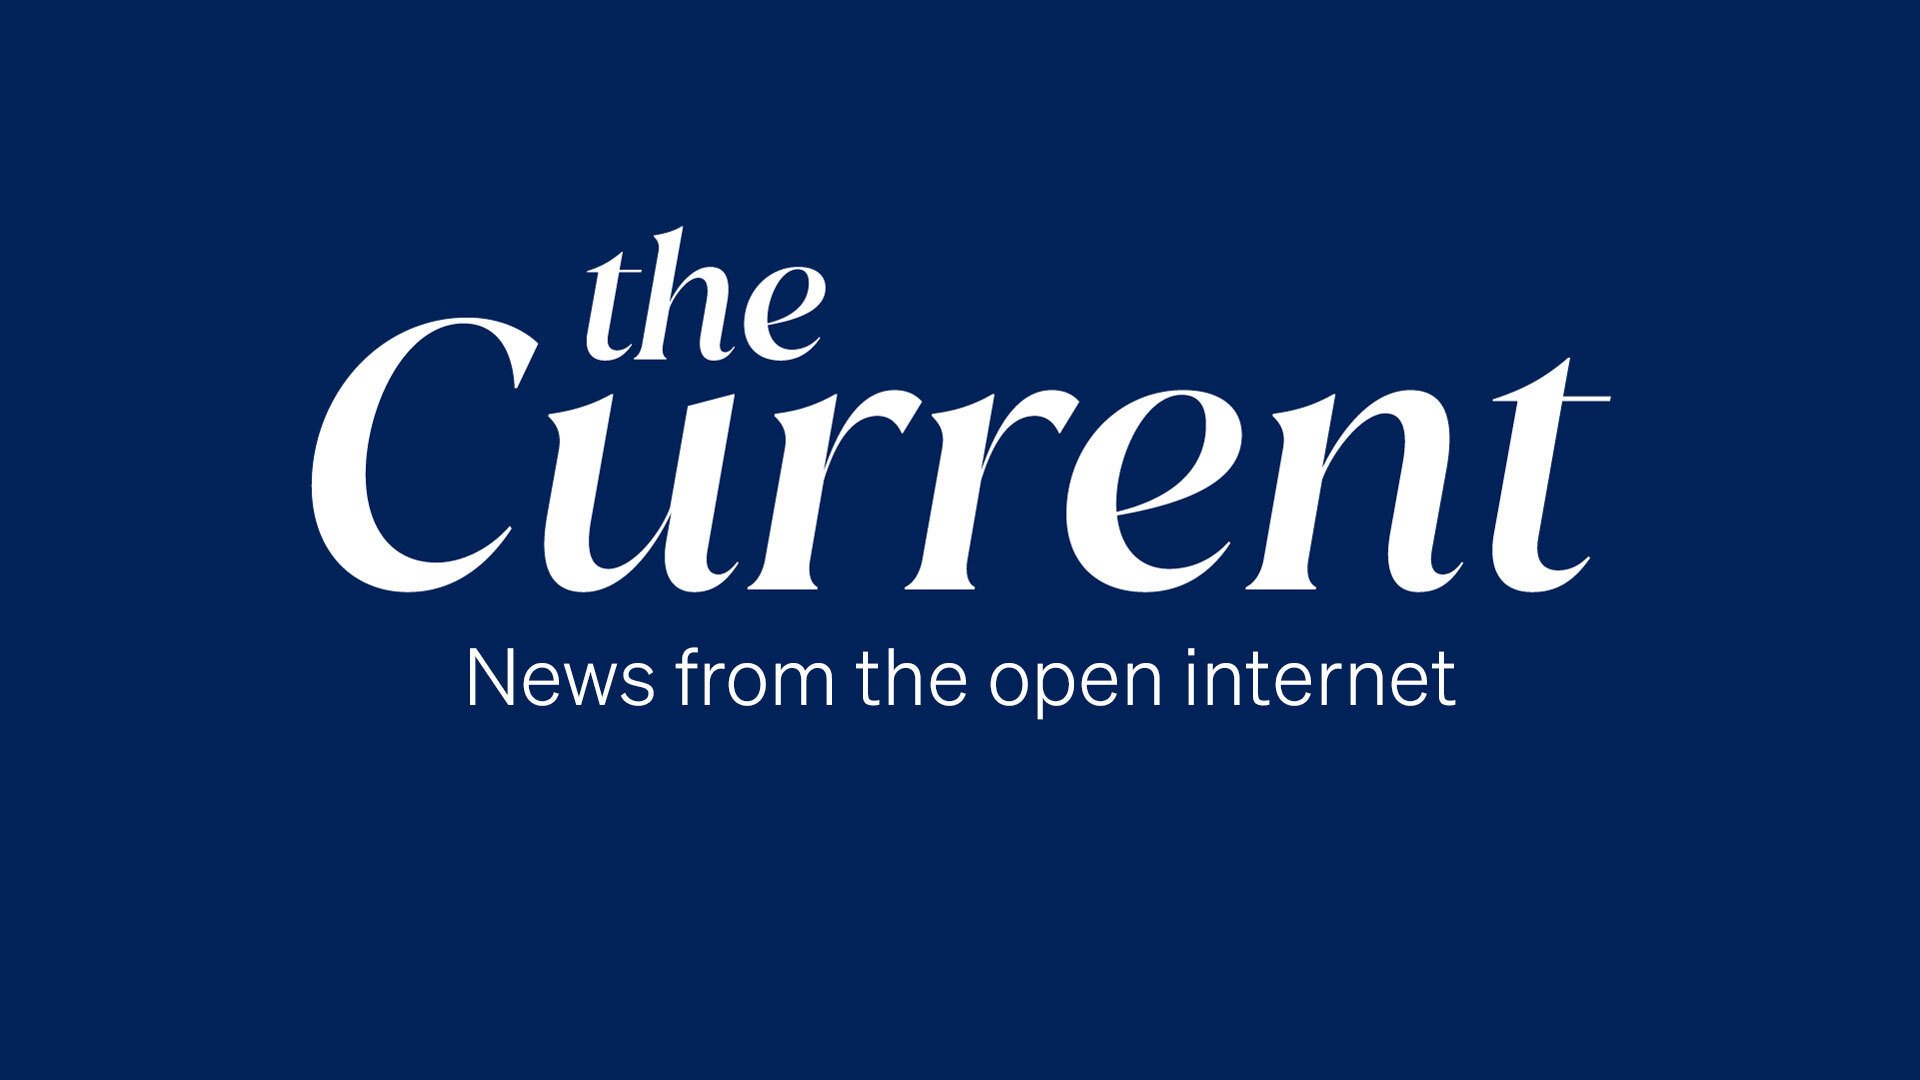 News from the open internet | The Current